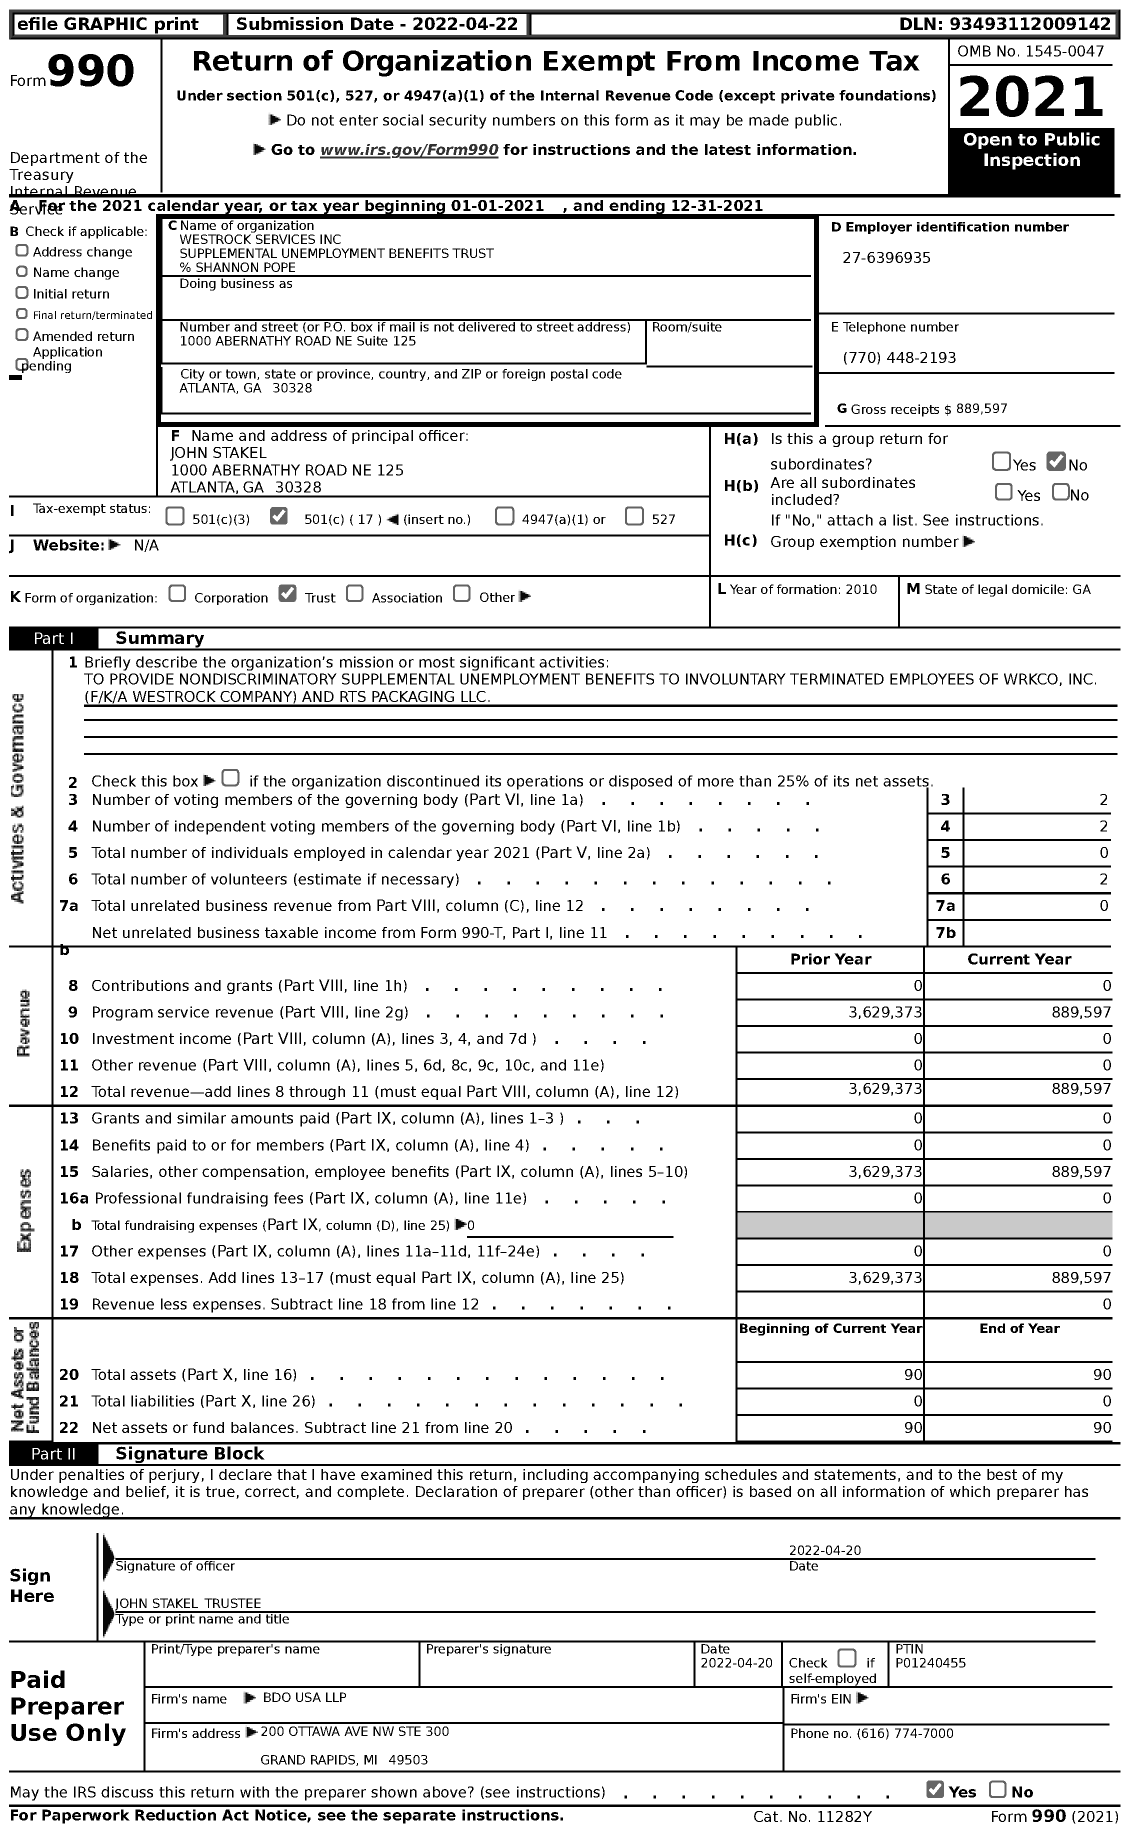 Image of first page of 2021 Form 990 for Westrock Services Supplemental Unemployment Benefits Trust